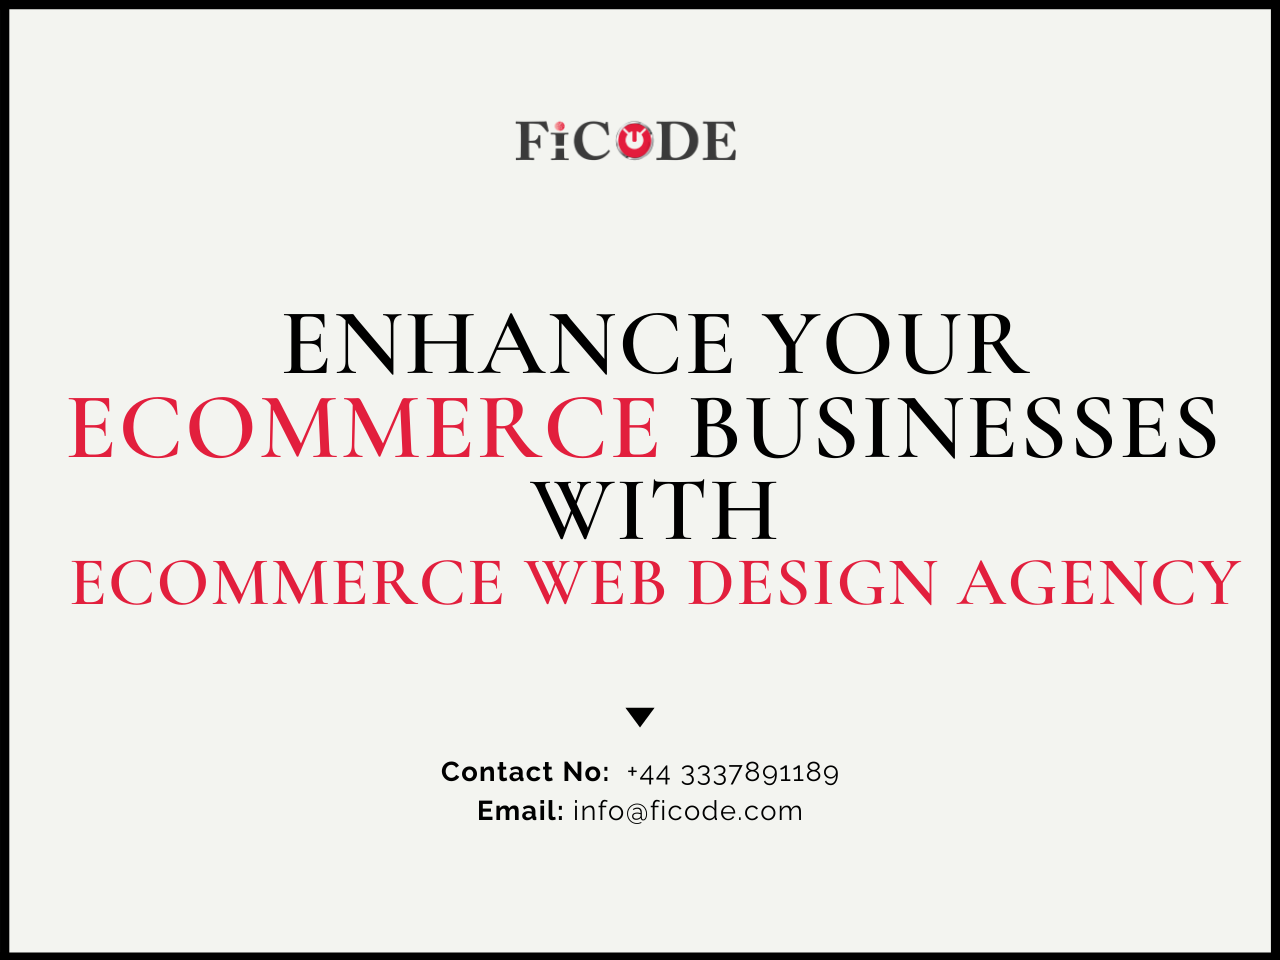 Enhance Ecommerce Businesses with Ficode, an Ecommerce Web Design Agency